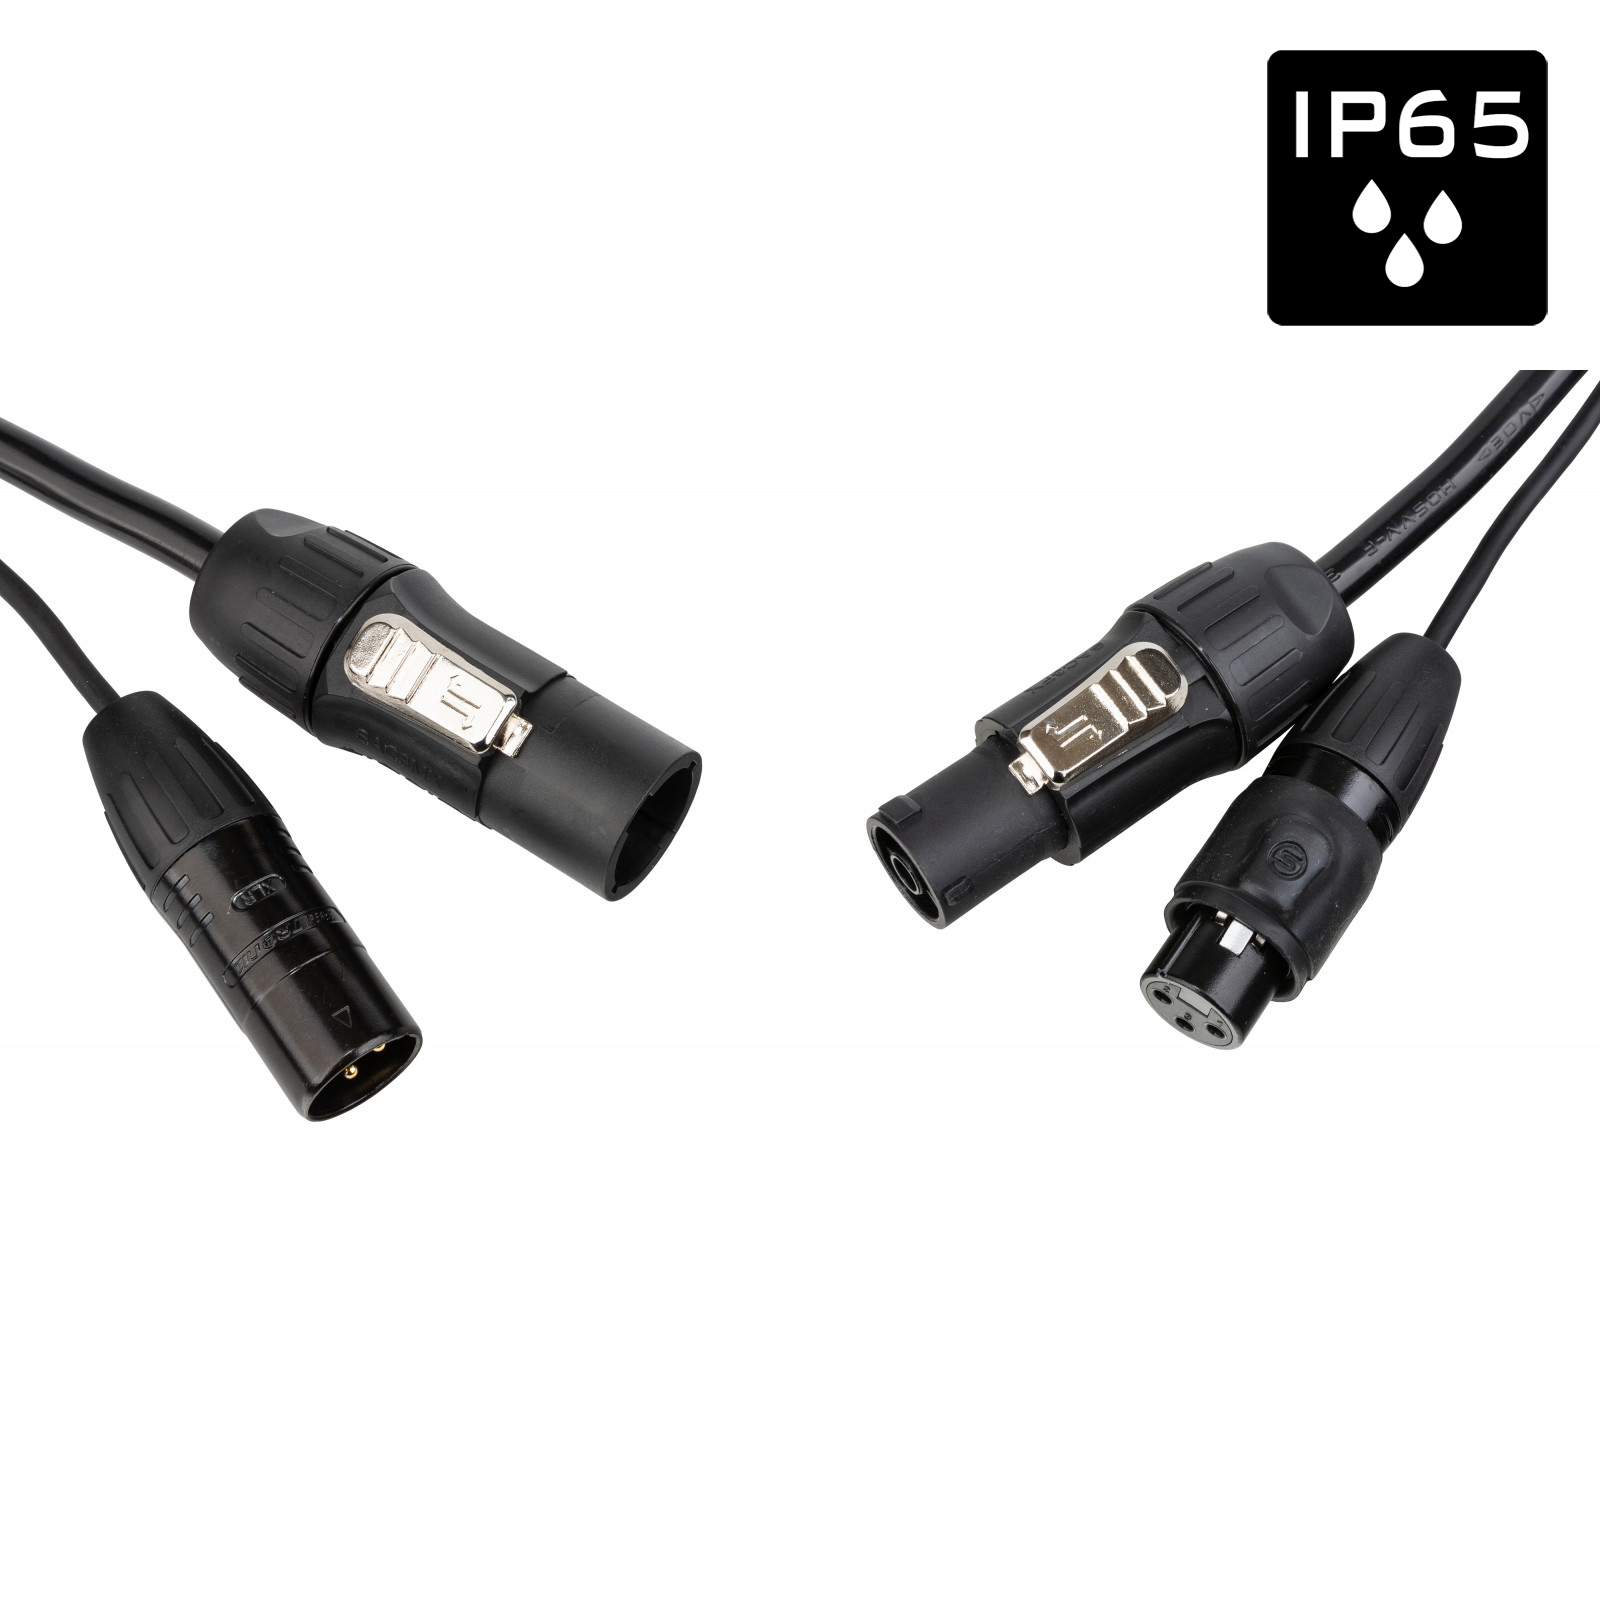 IP65 Outdoor combi cable with Seetronic XLR 3pin and True1 compatible connectors - Length 10m